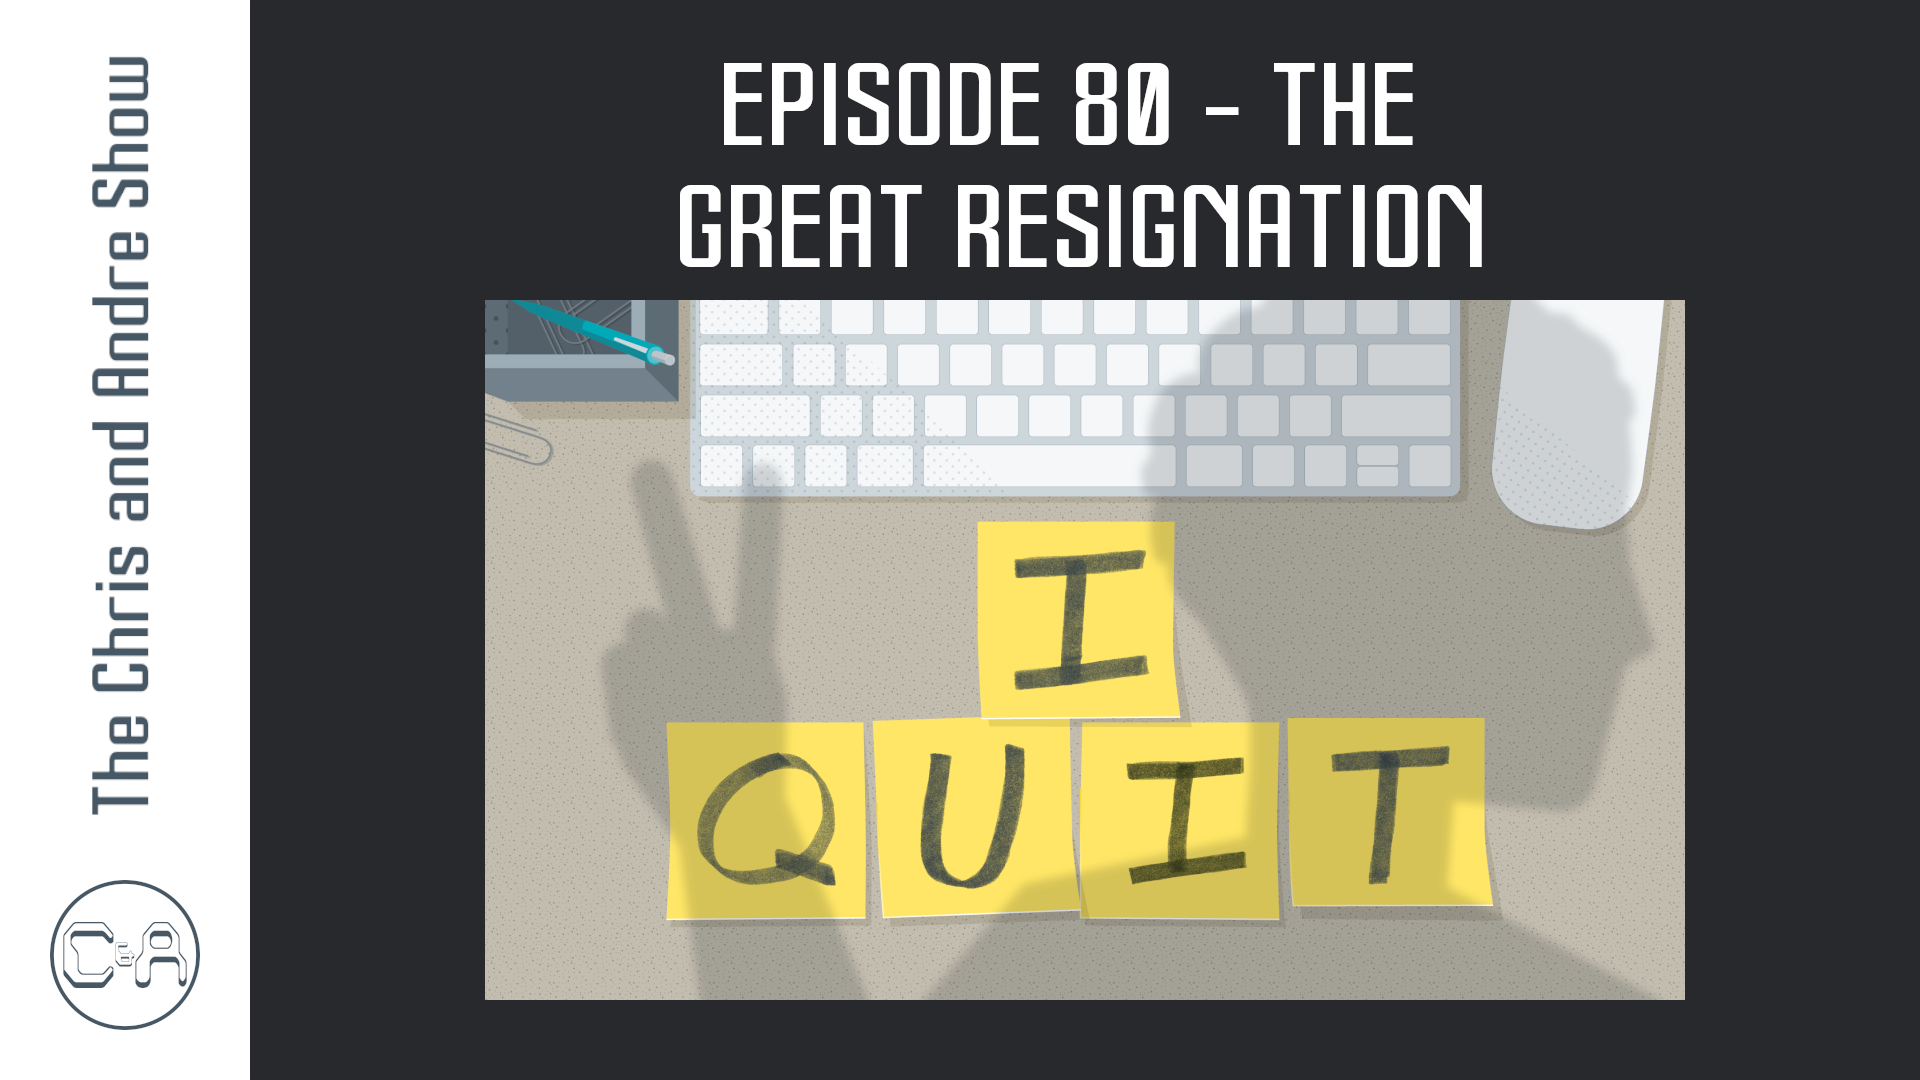 Episode 80 - The Great Resignation